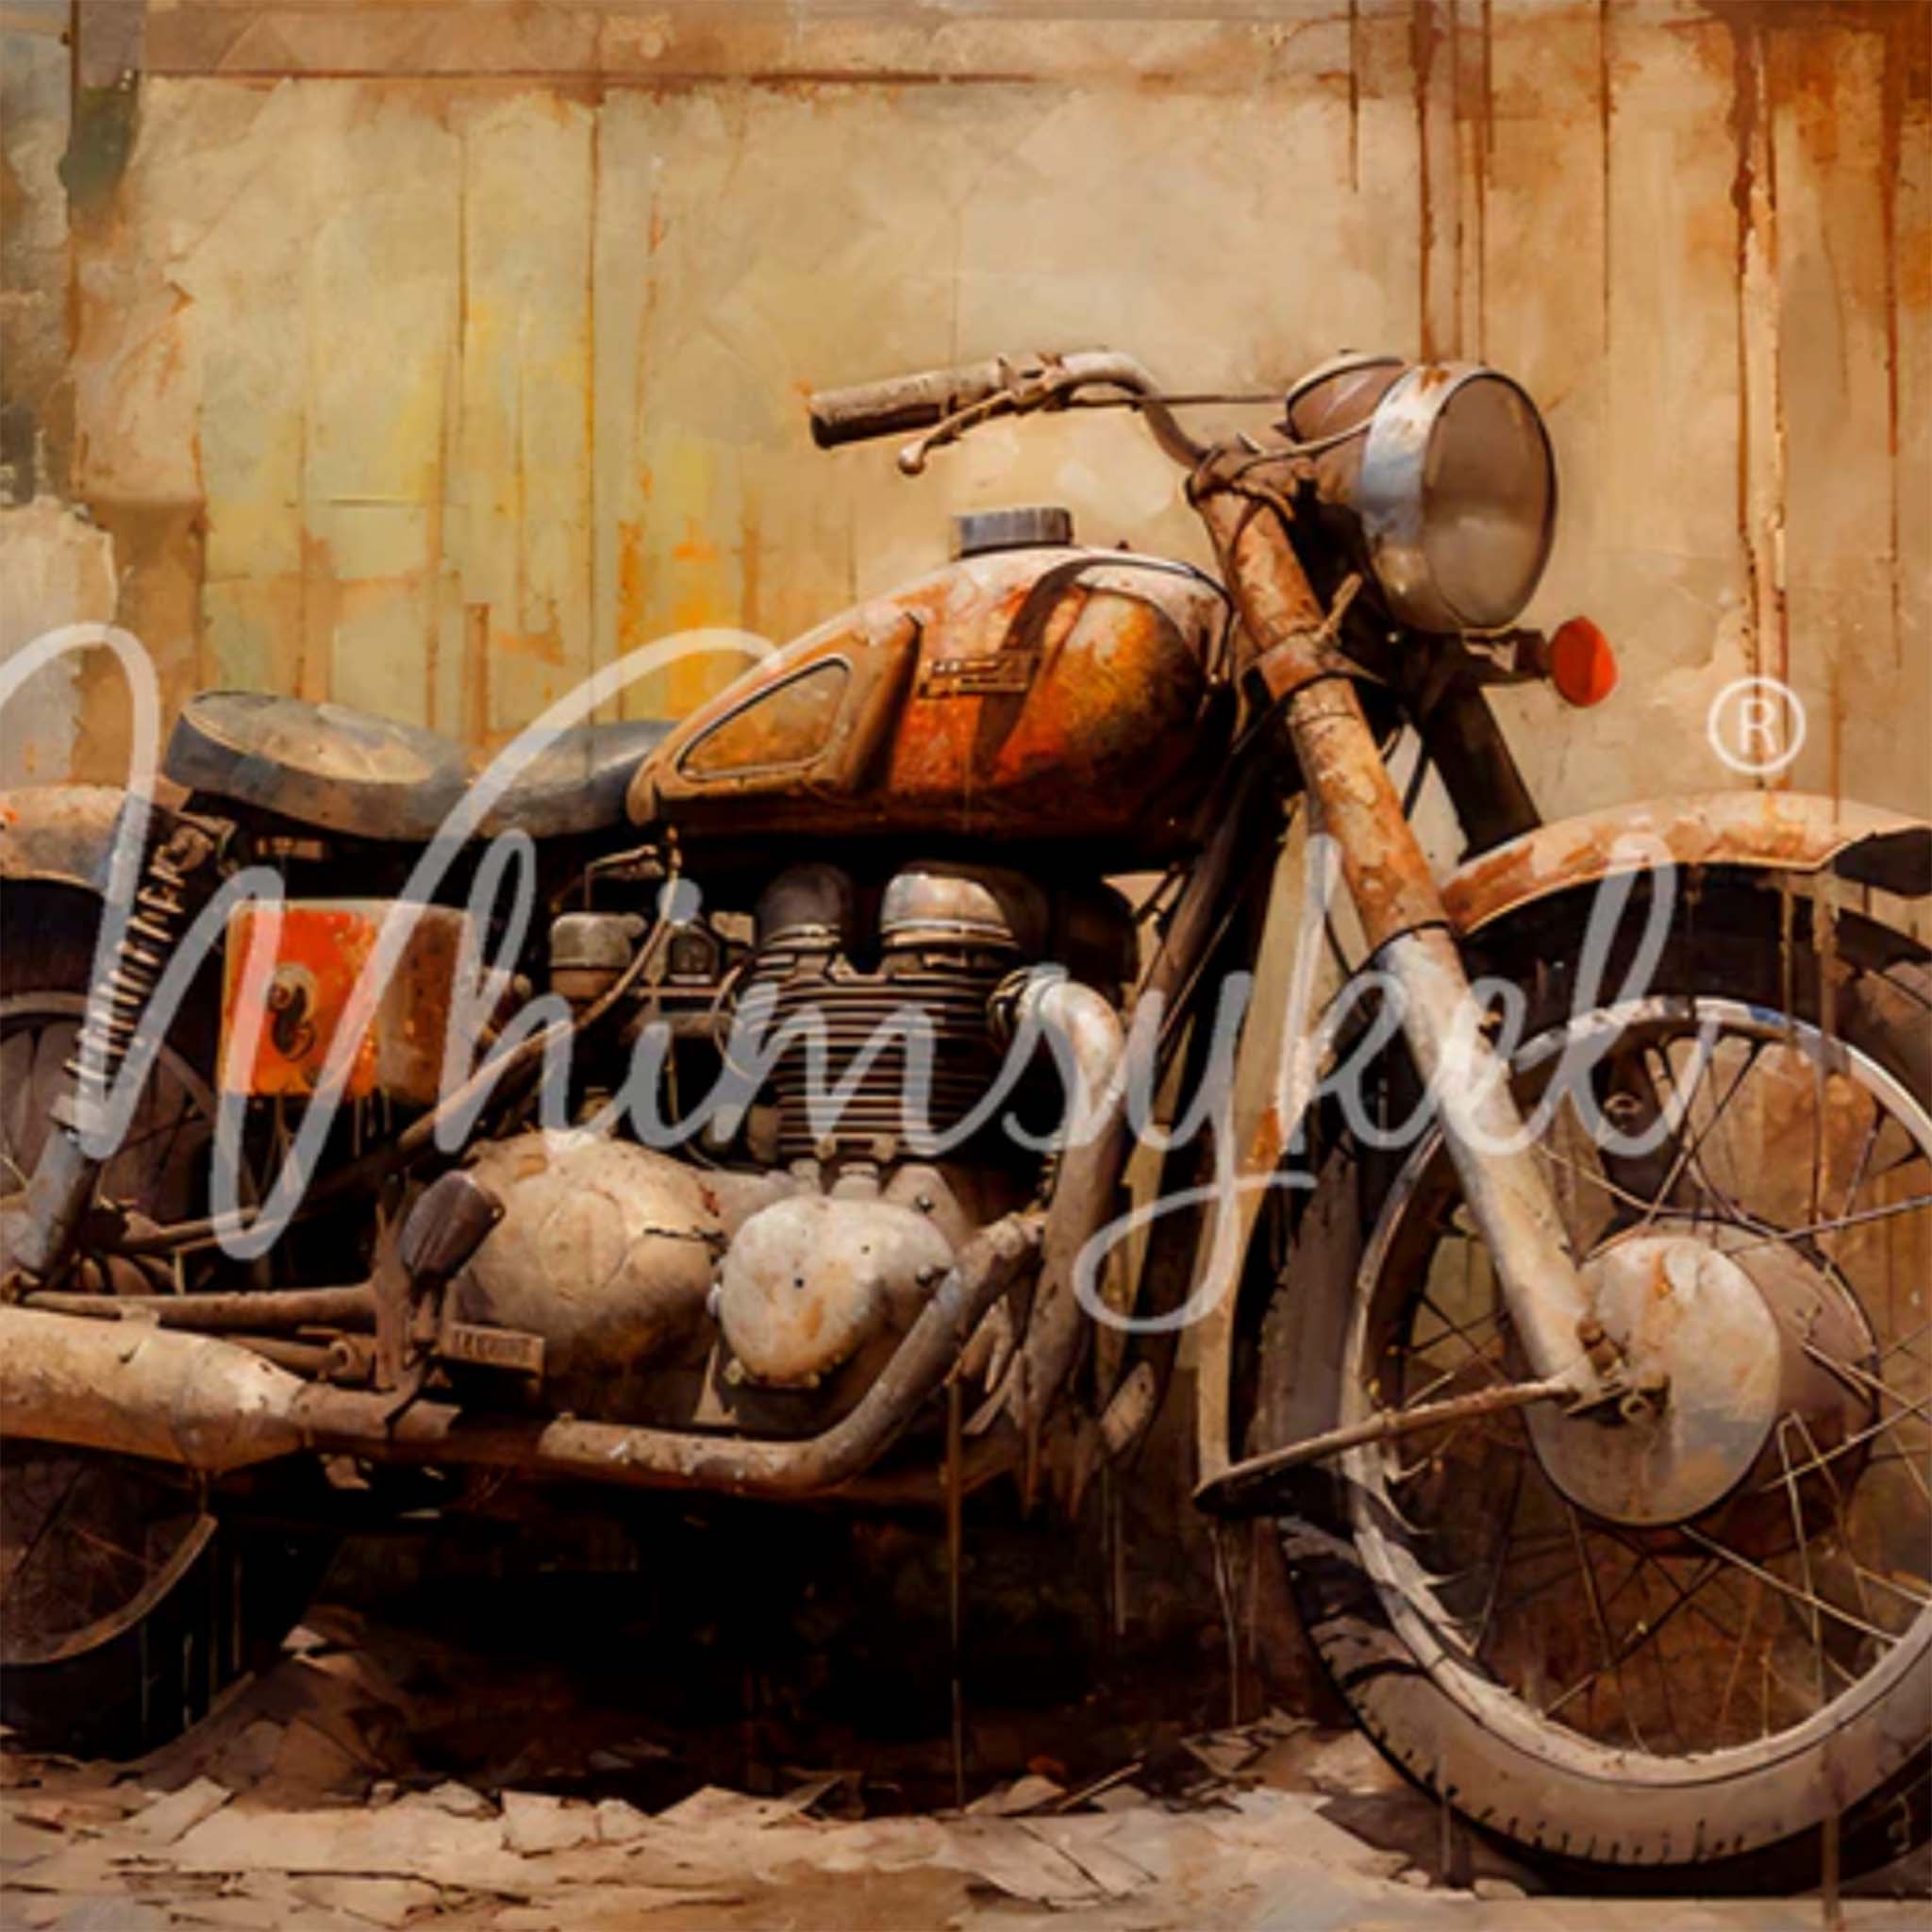 Close-up of a tissue paper design that features a vintage motorcycle with fading paint against a concrete wall. 